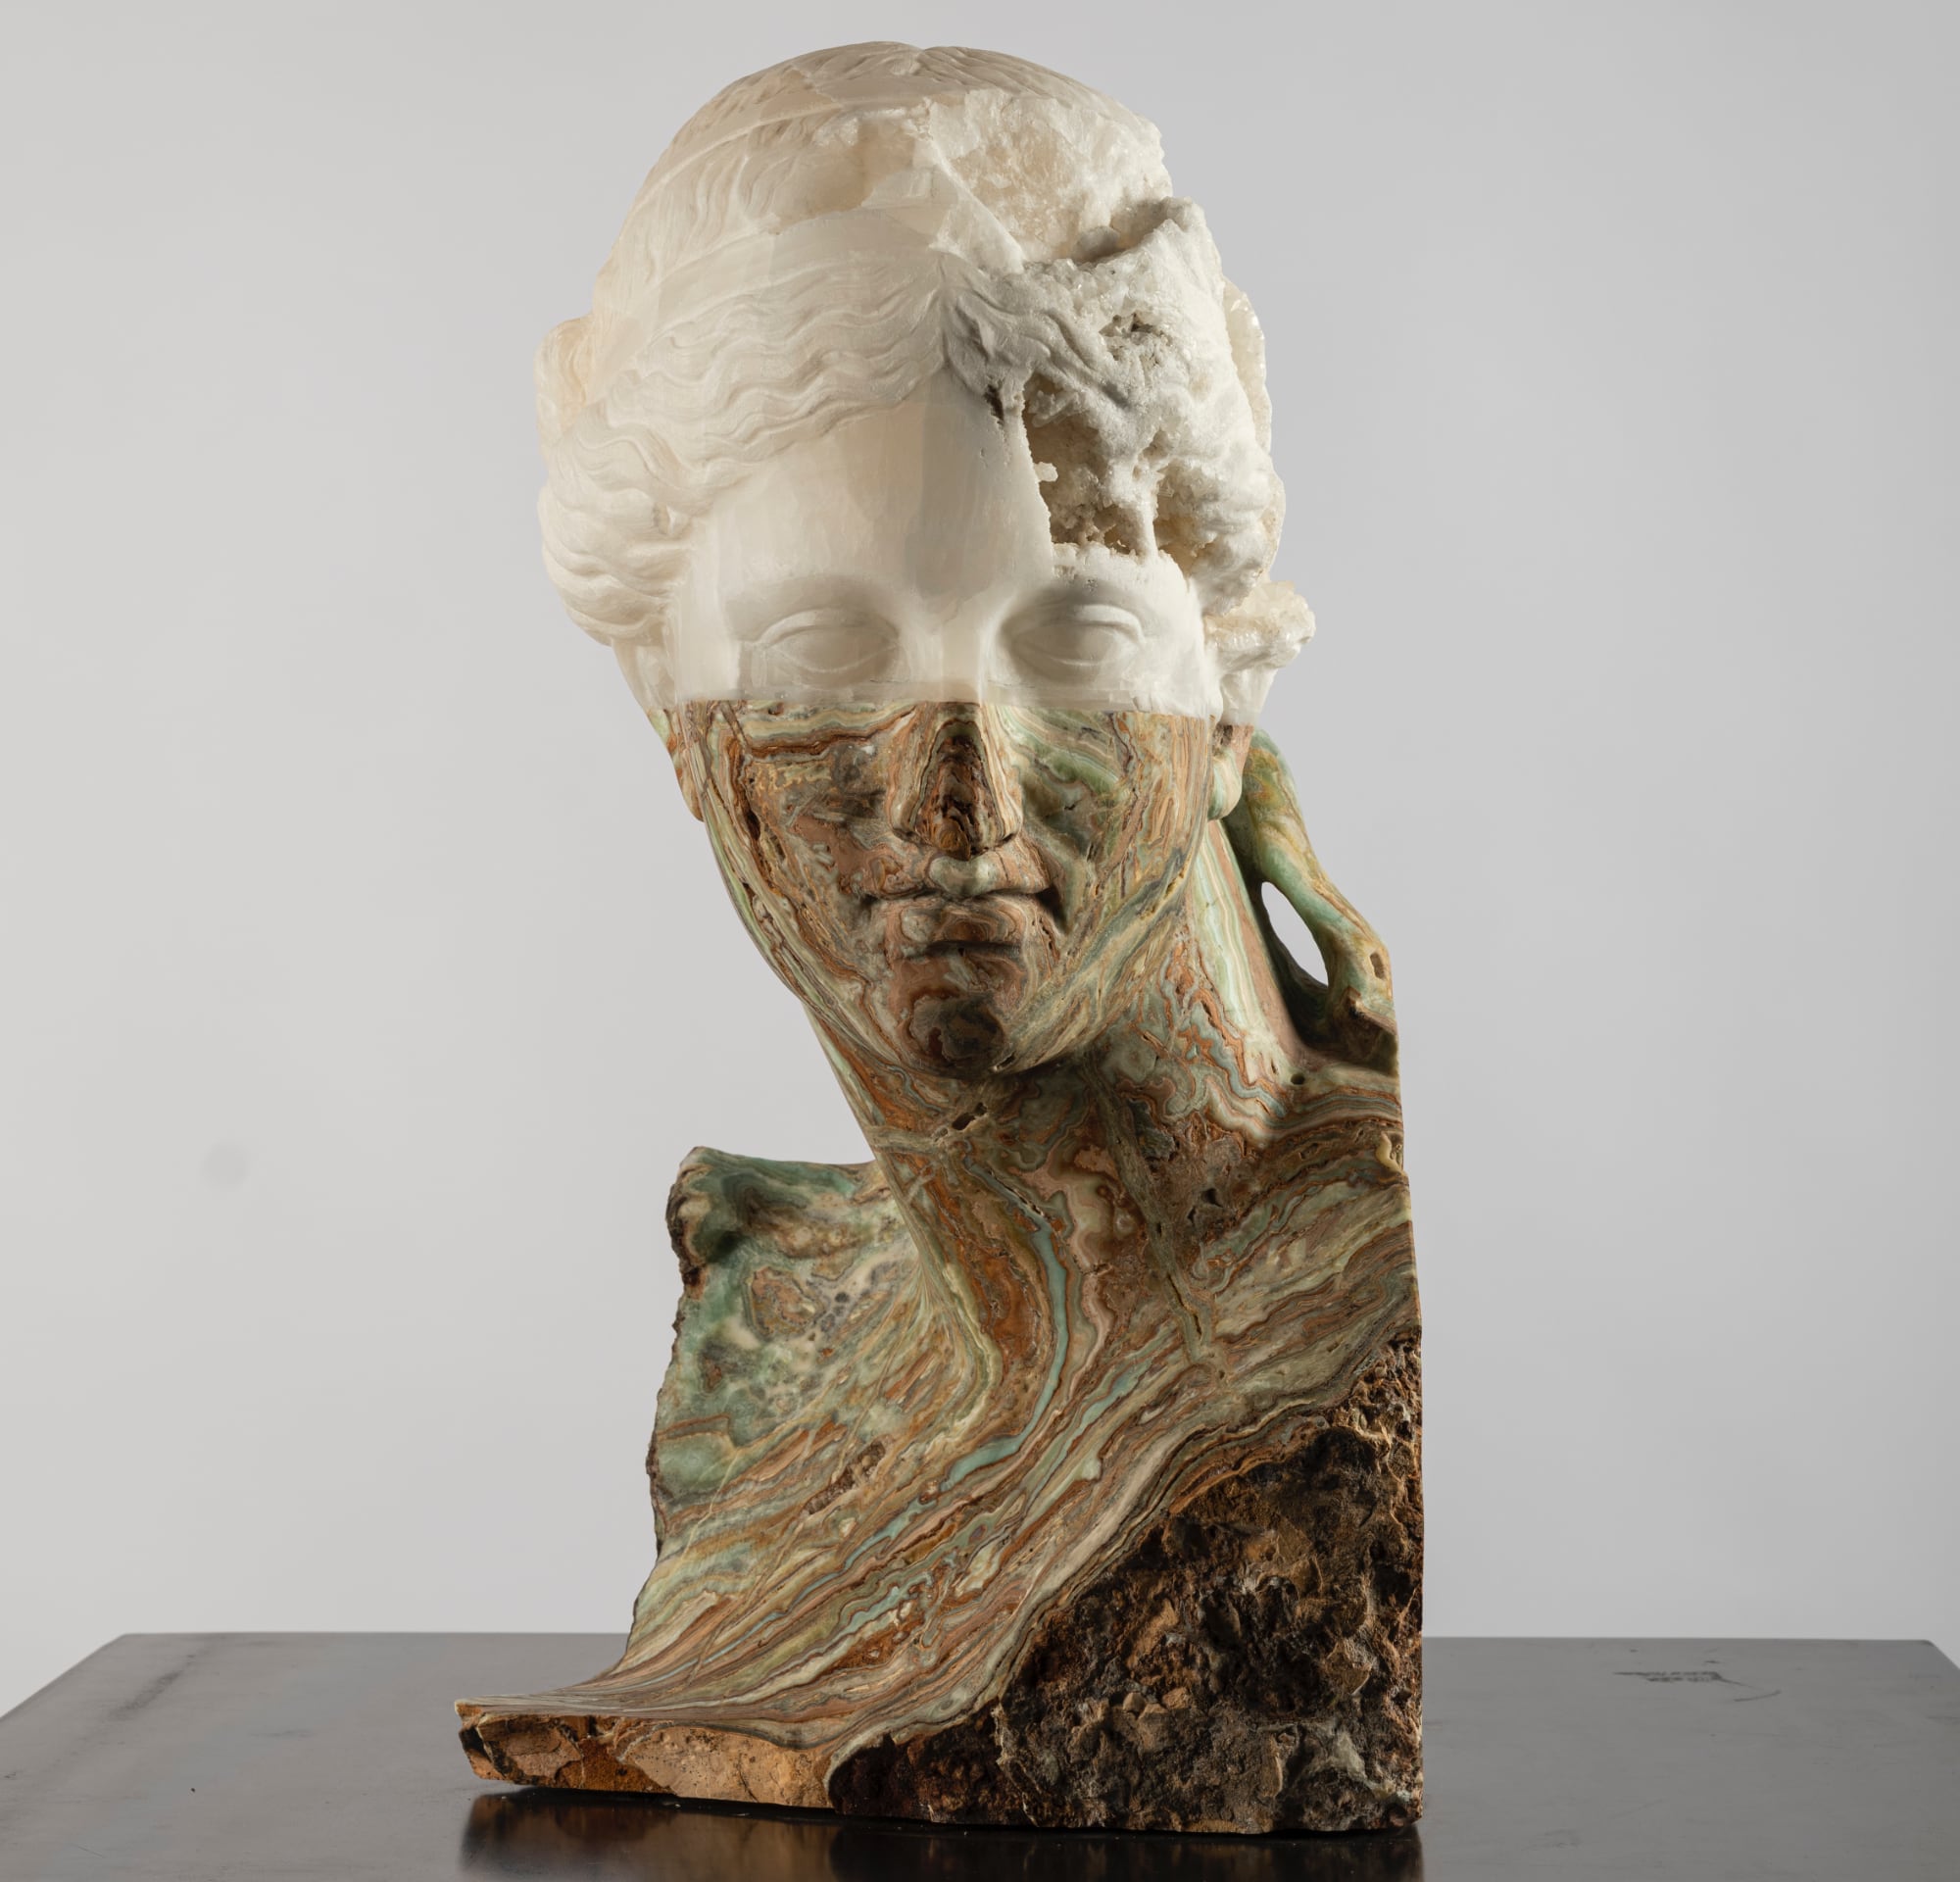 A bust spliced with white stone and green marbled stone